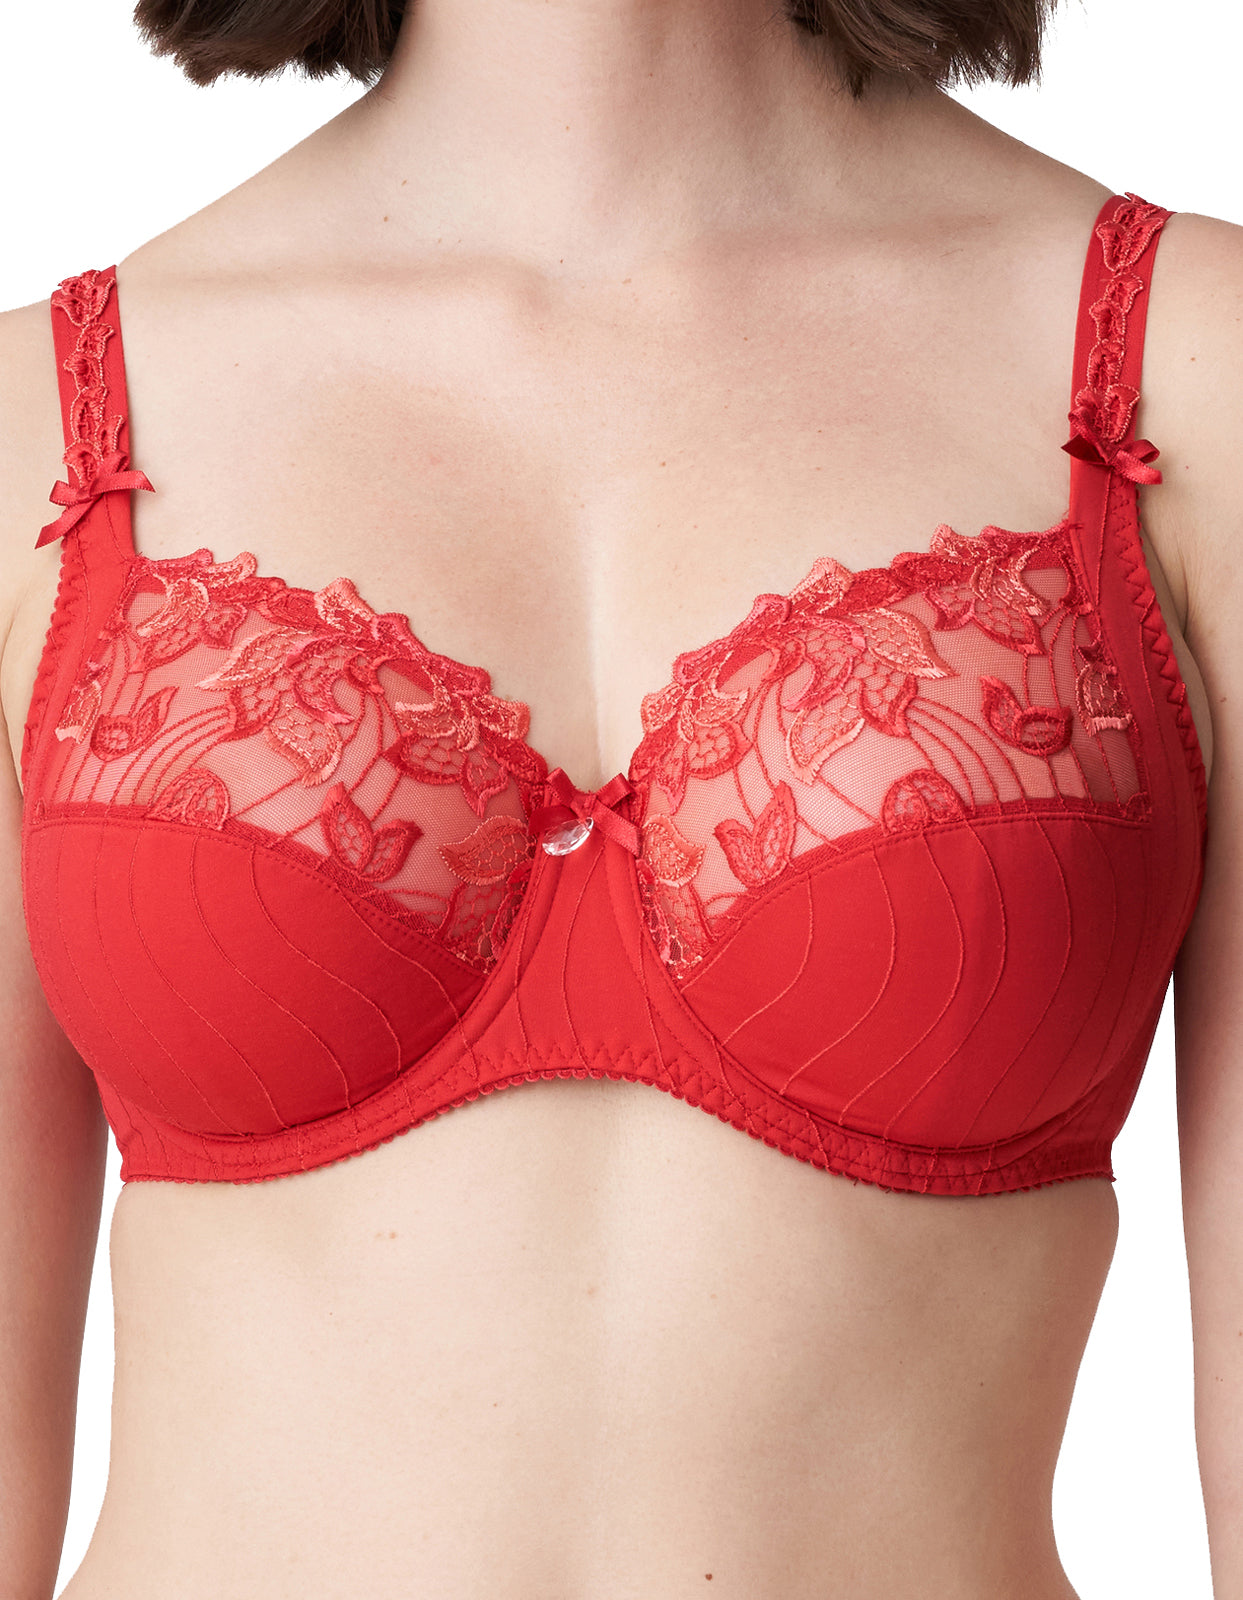 PrimaDonna Deauville 0161810/0161811-SCA Scarlet Embroidered Non-Padded Underwired Full Cup Bra